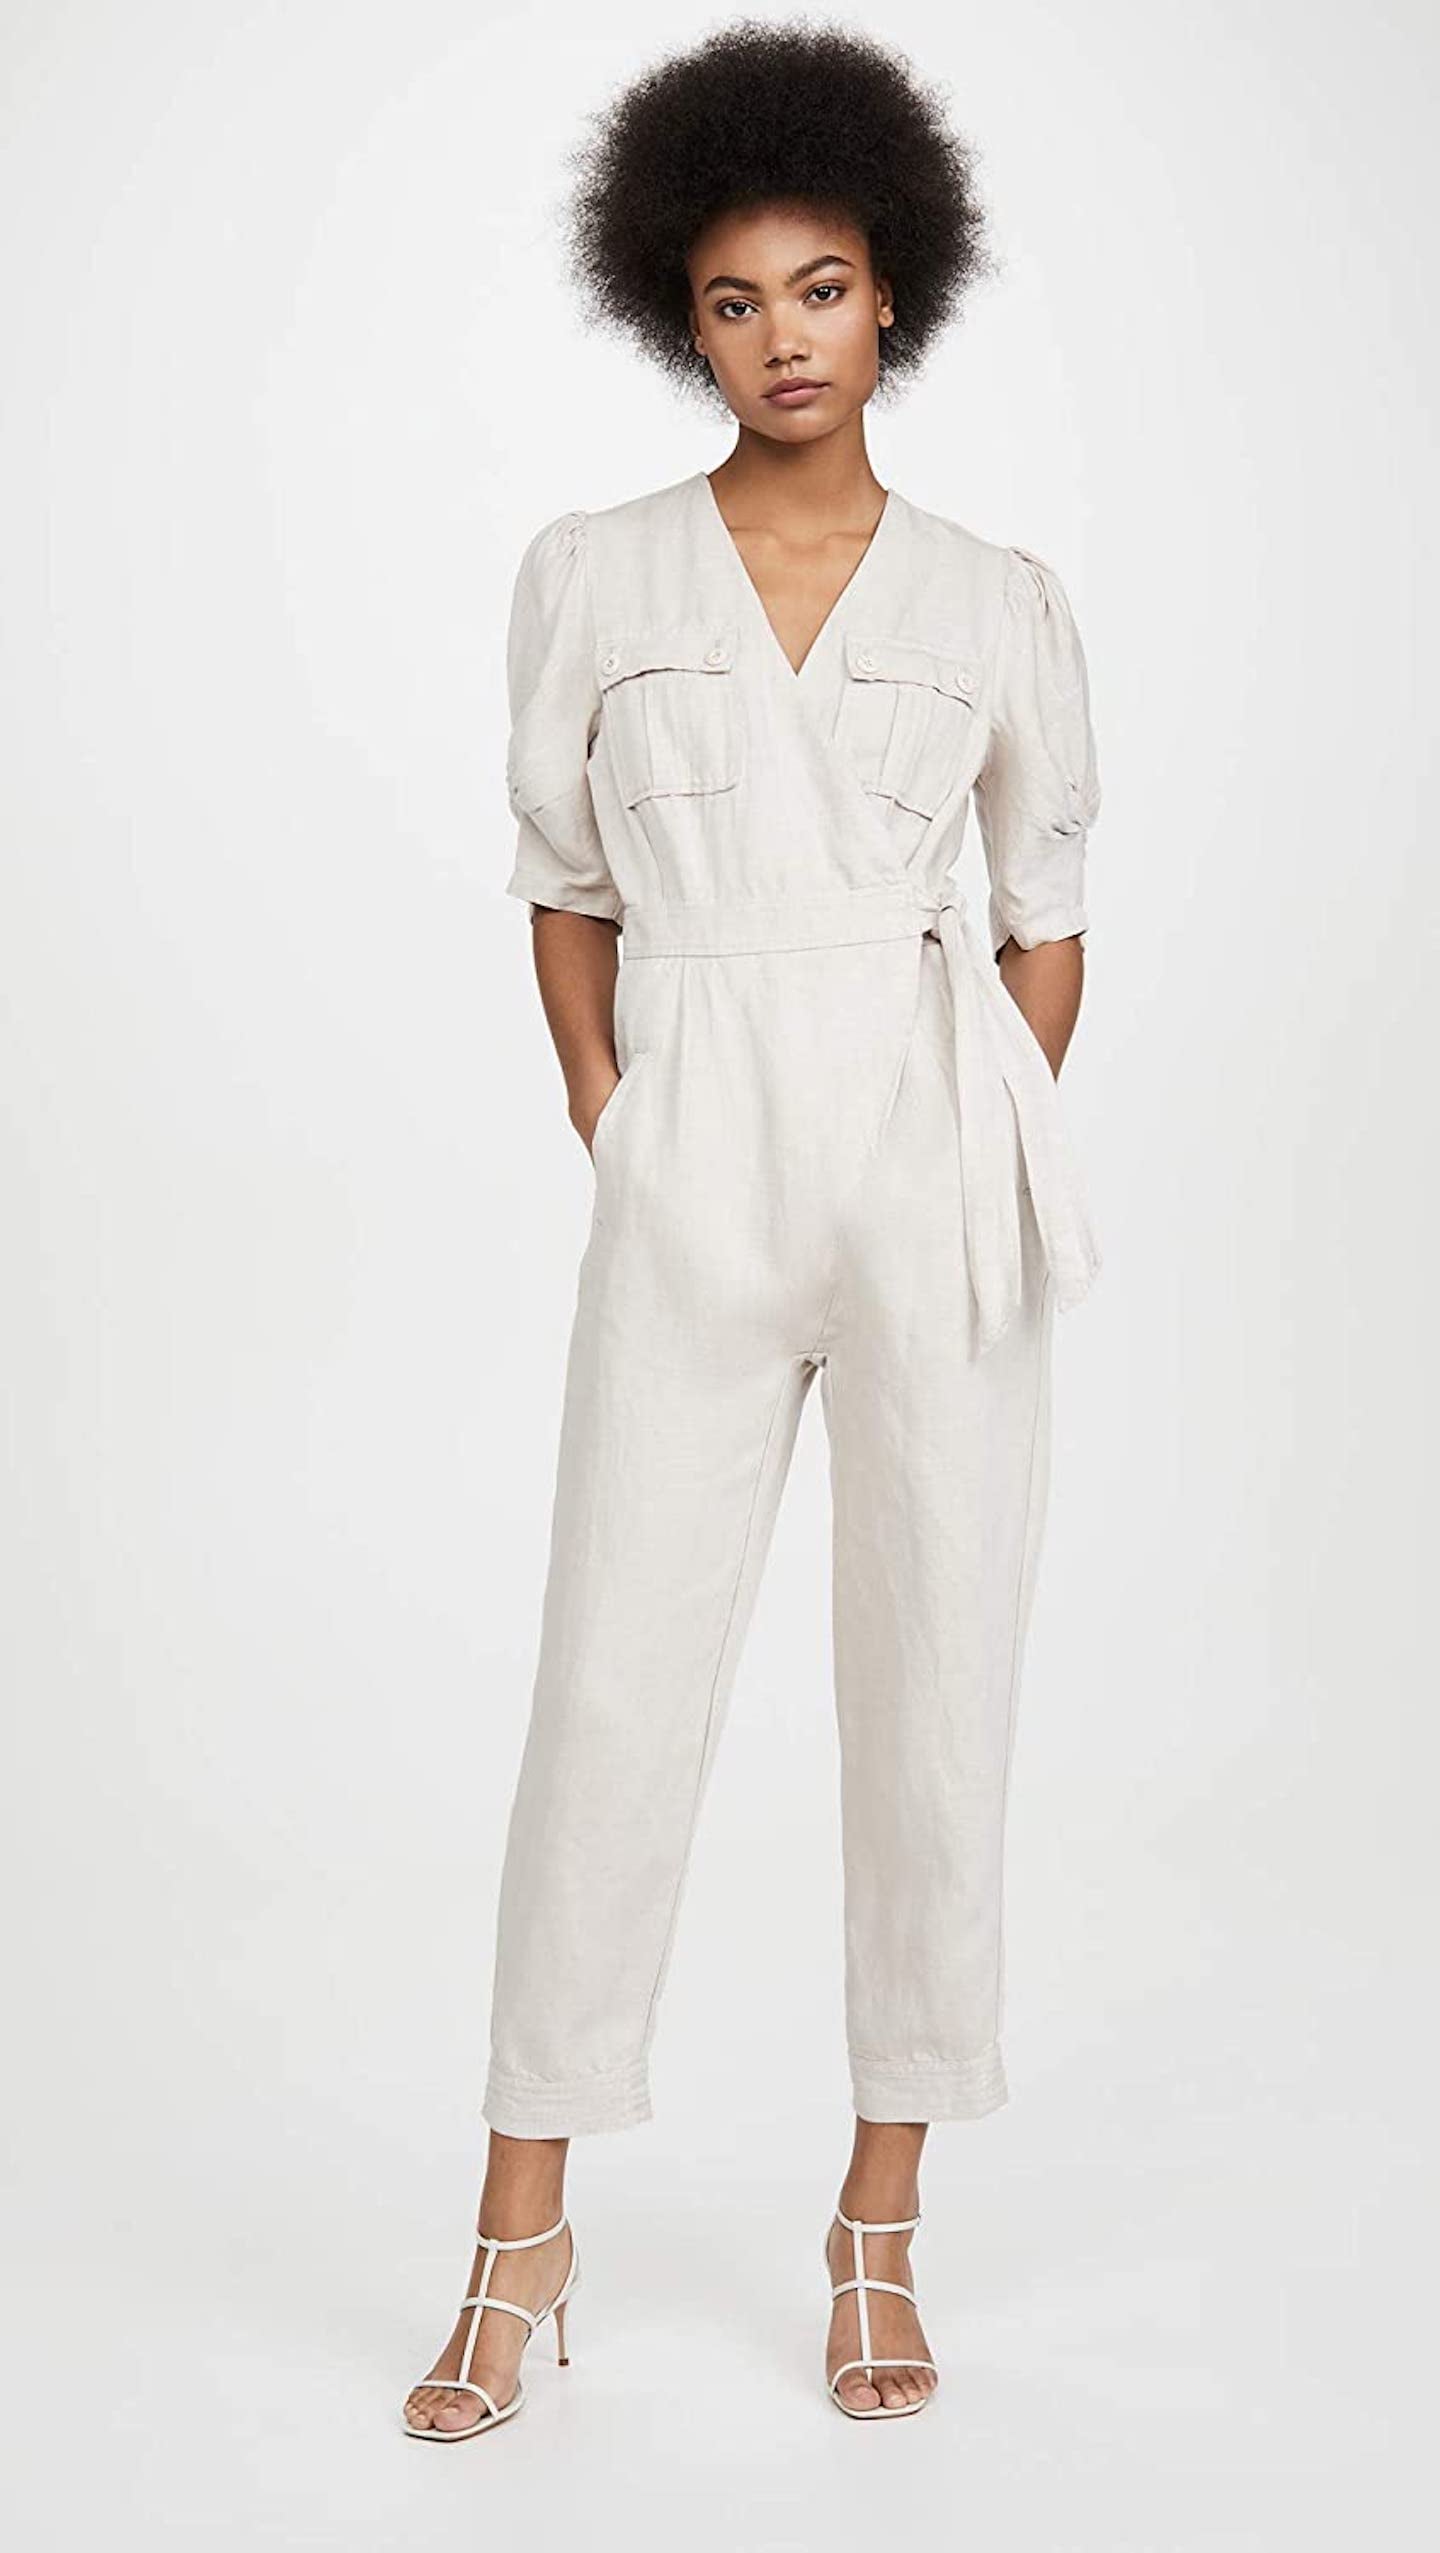 Best Jumpsuits on